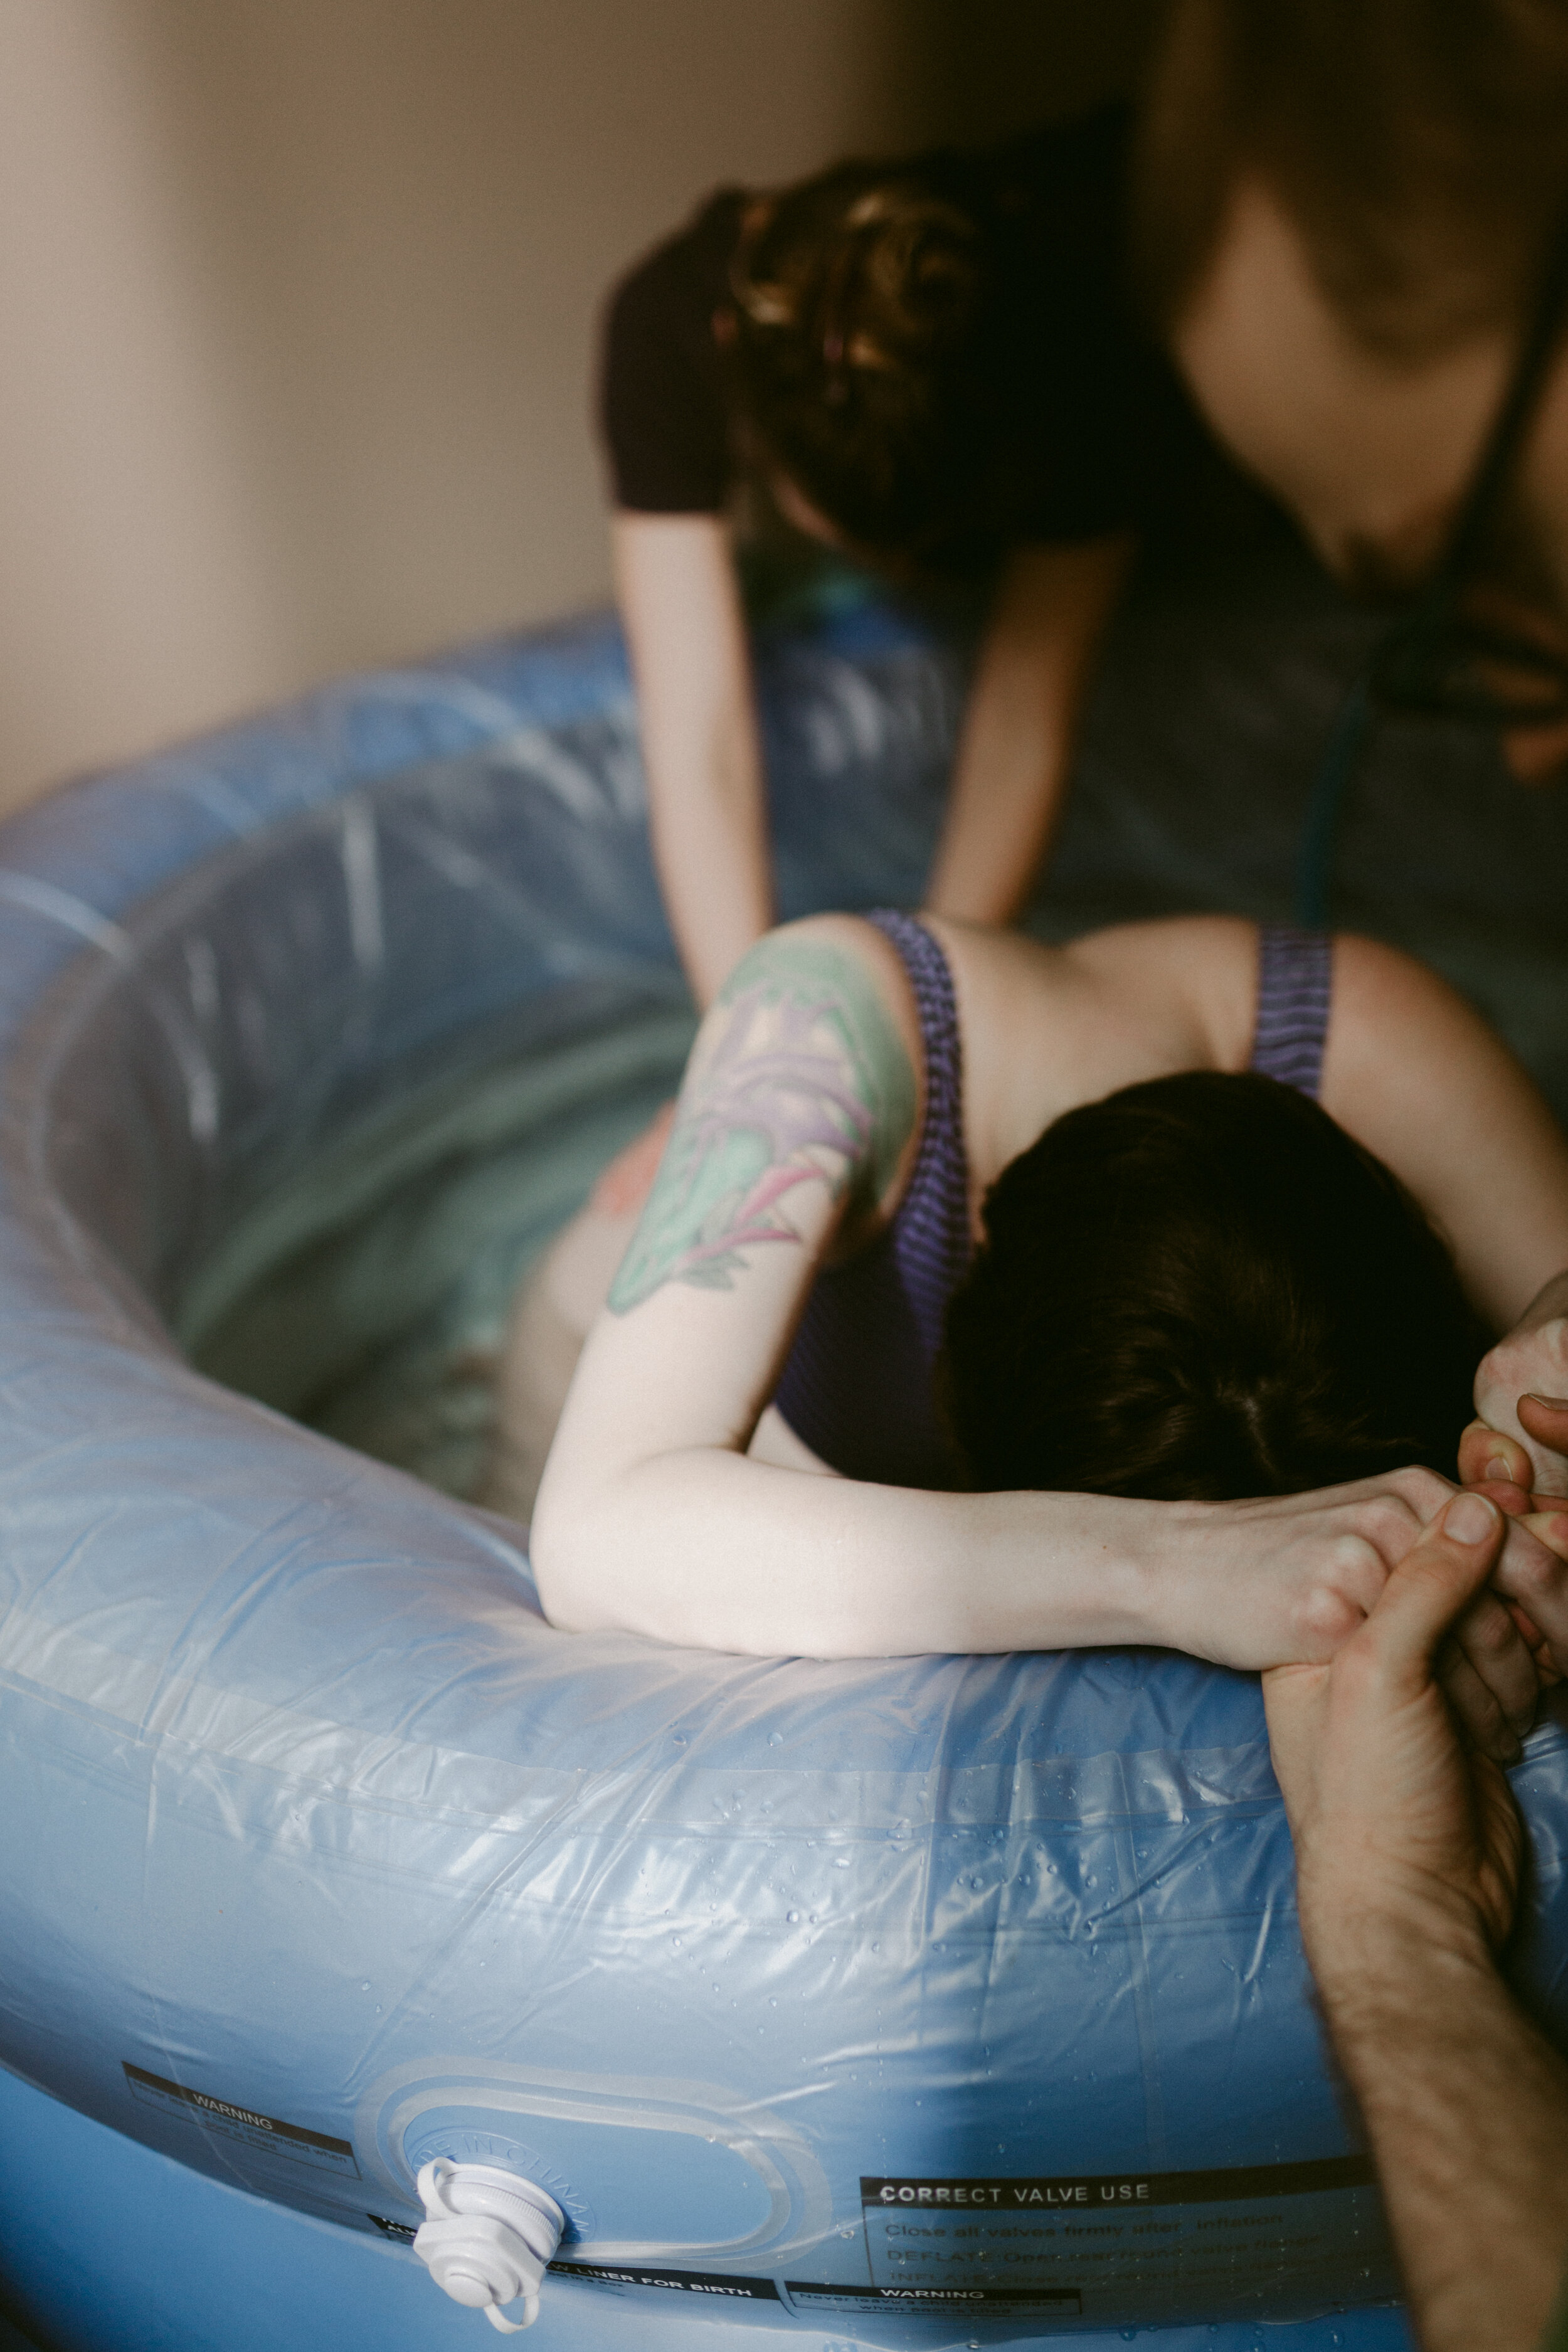 Midwife Lucy French applies pressure to a laboring mother's lower back during a water birth.